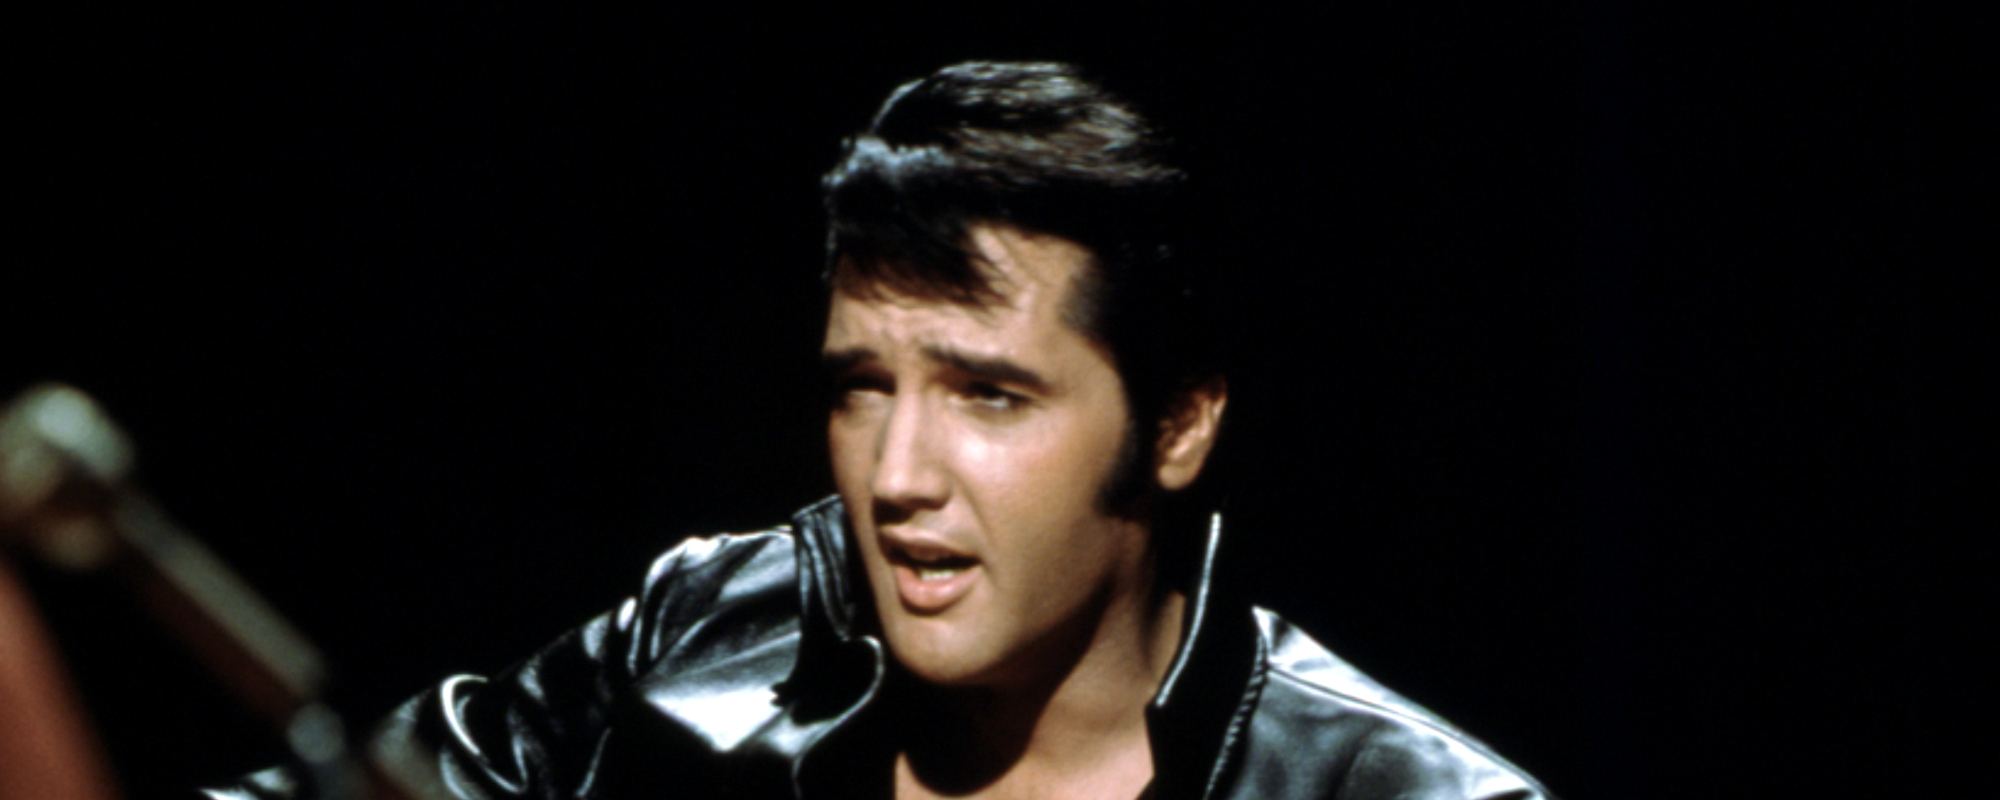 The 5 Greatest Covers of Elvis Presley Songs